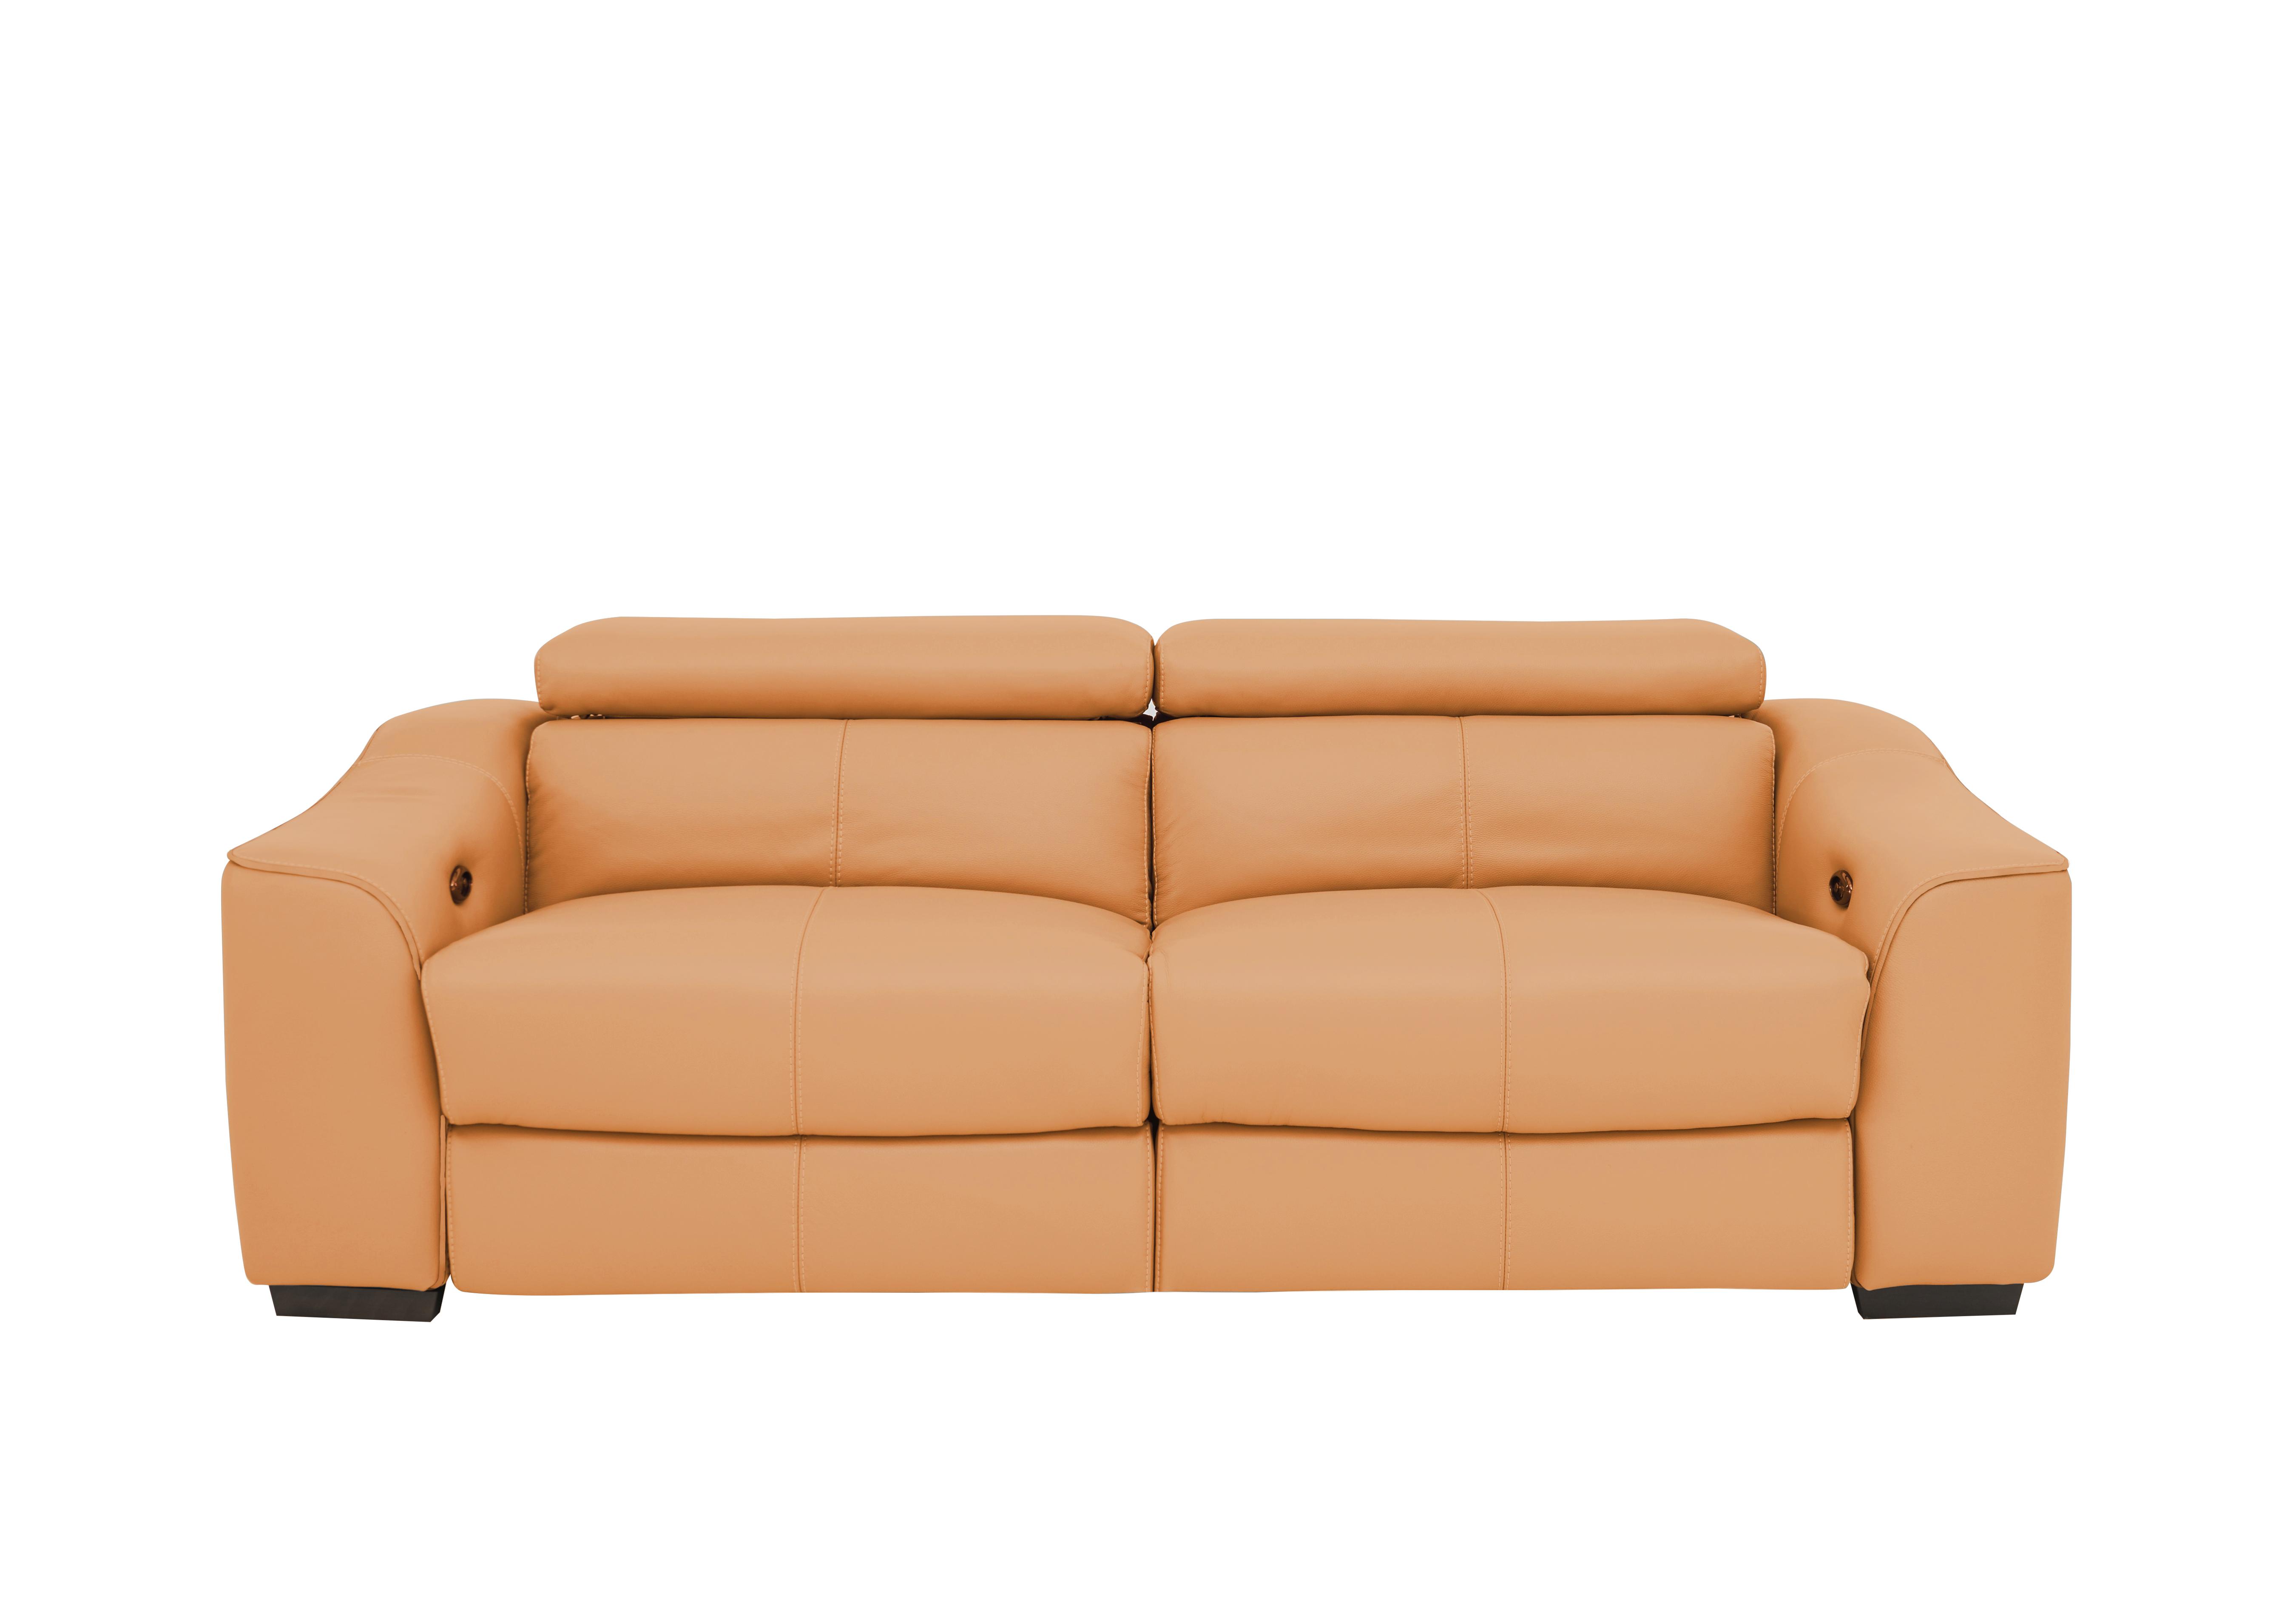 Elixir 3 Seater Leather Sofa in Bv-335e Honey Yellow on Furniture Village